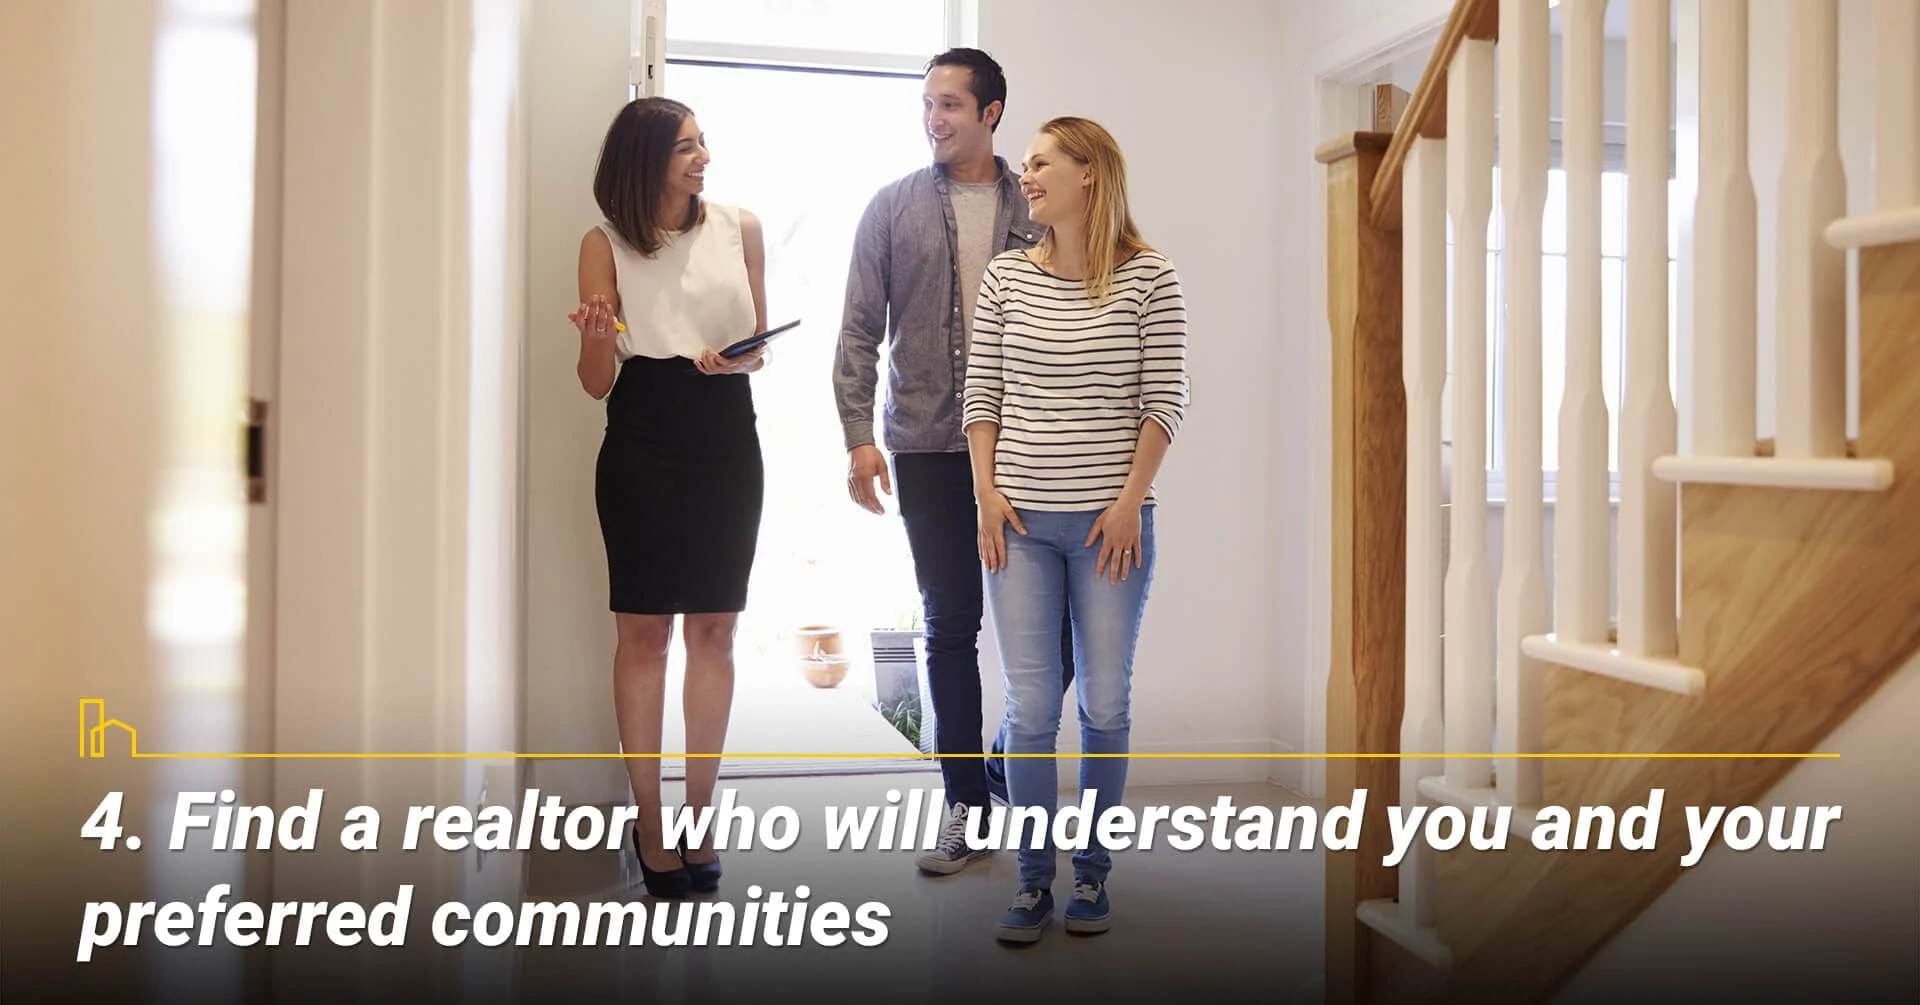 Find a realtor who will understand you and your preferred communities, work with a realtor to find your ideal community